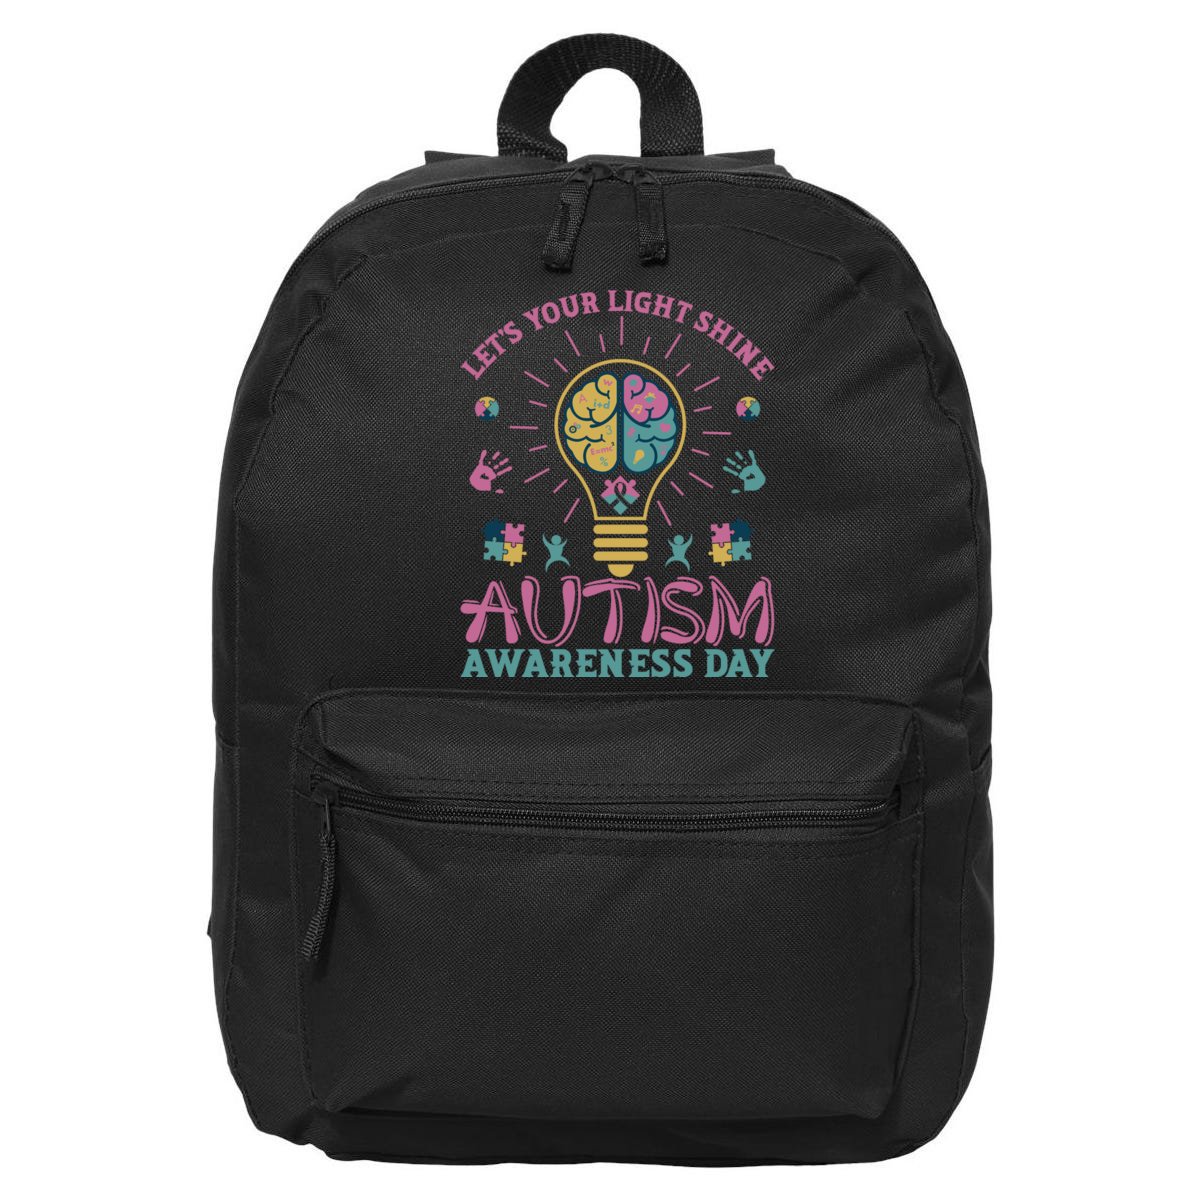 Let's Your Light Shine Autism Awareness Day 16 in Basic Backpack